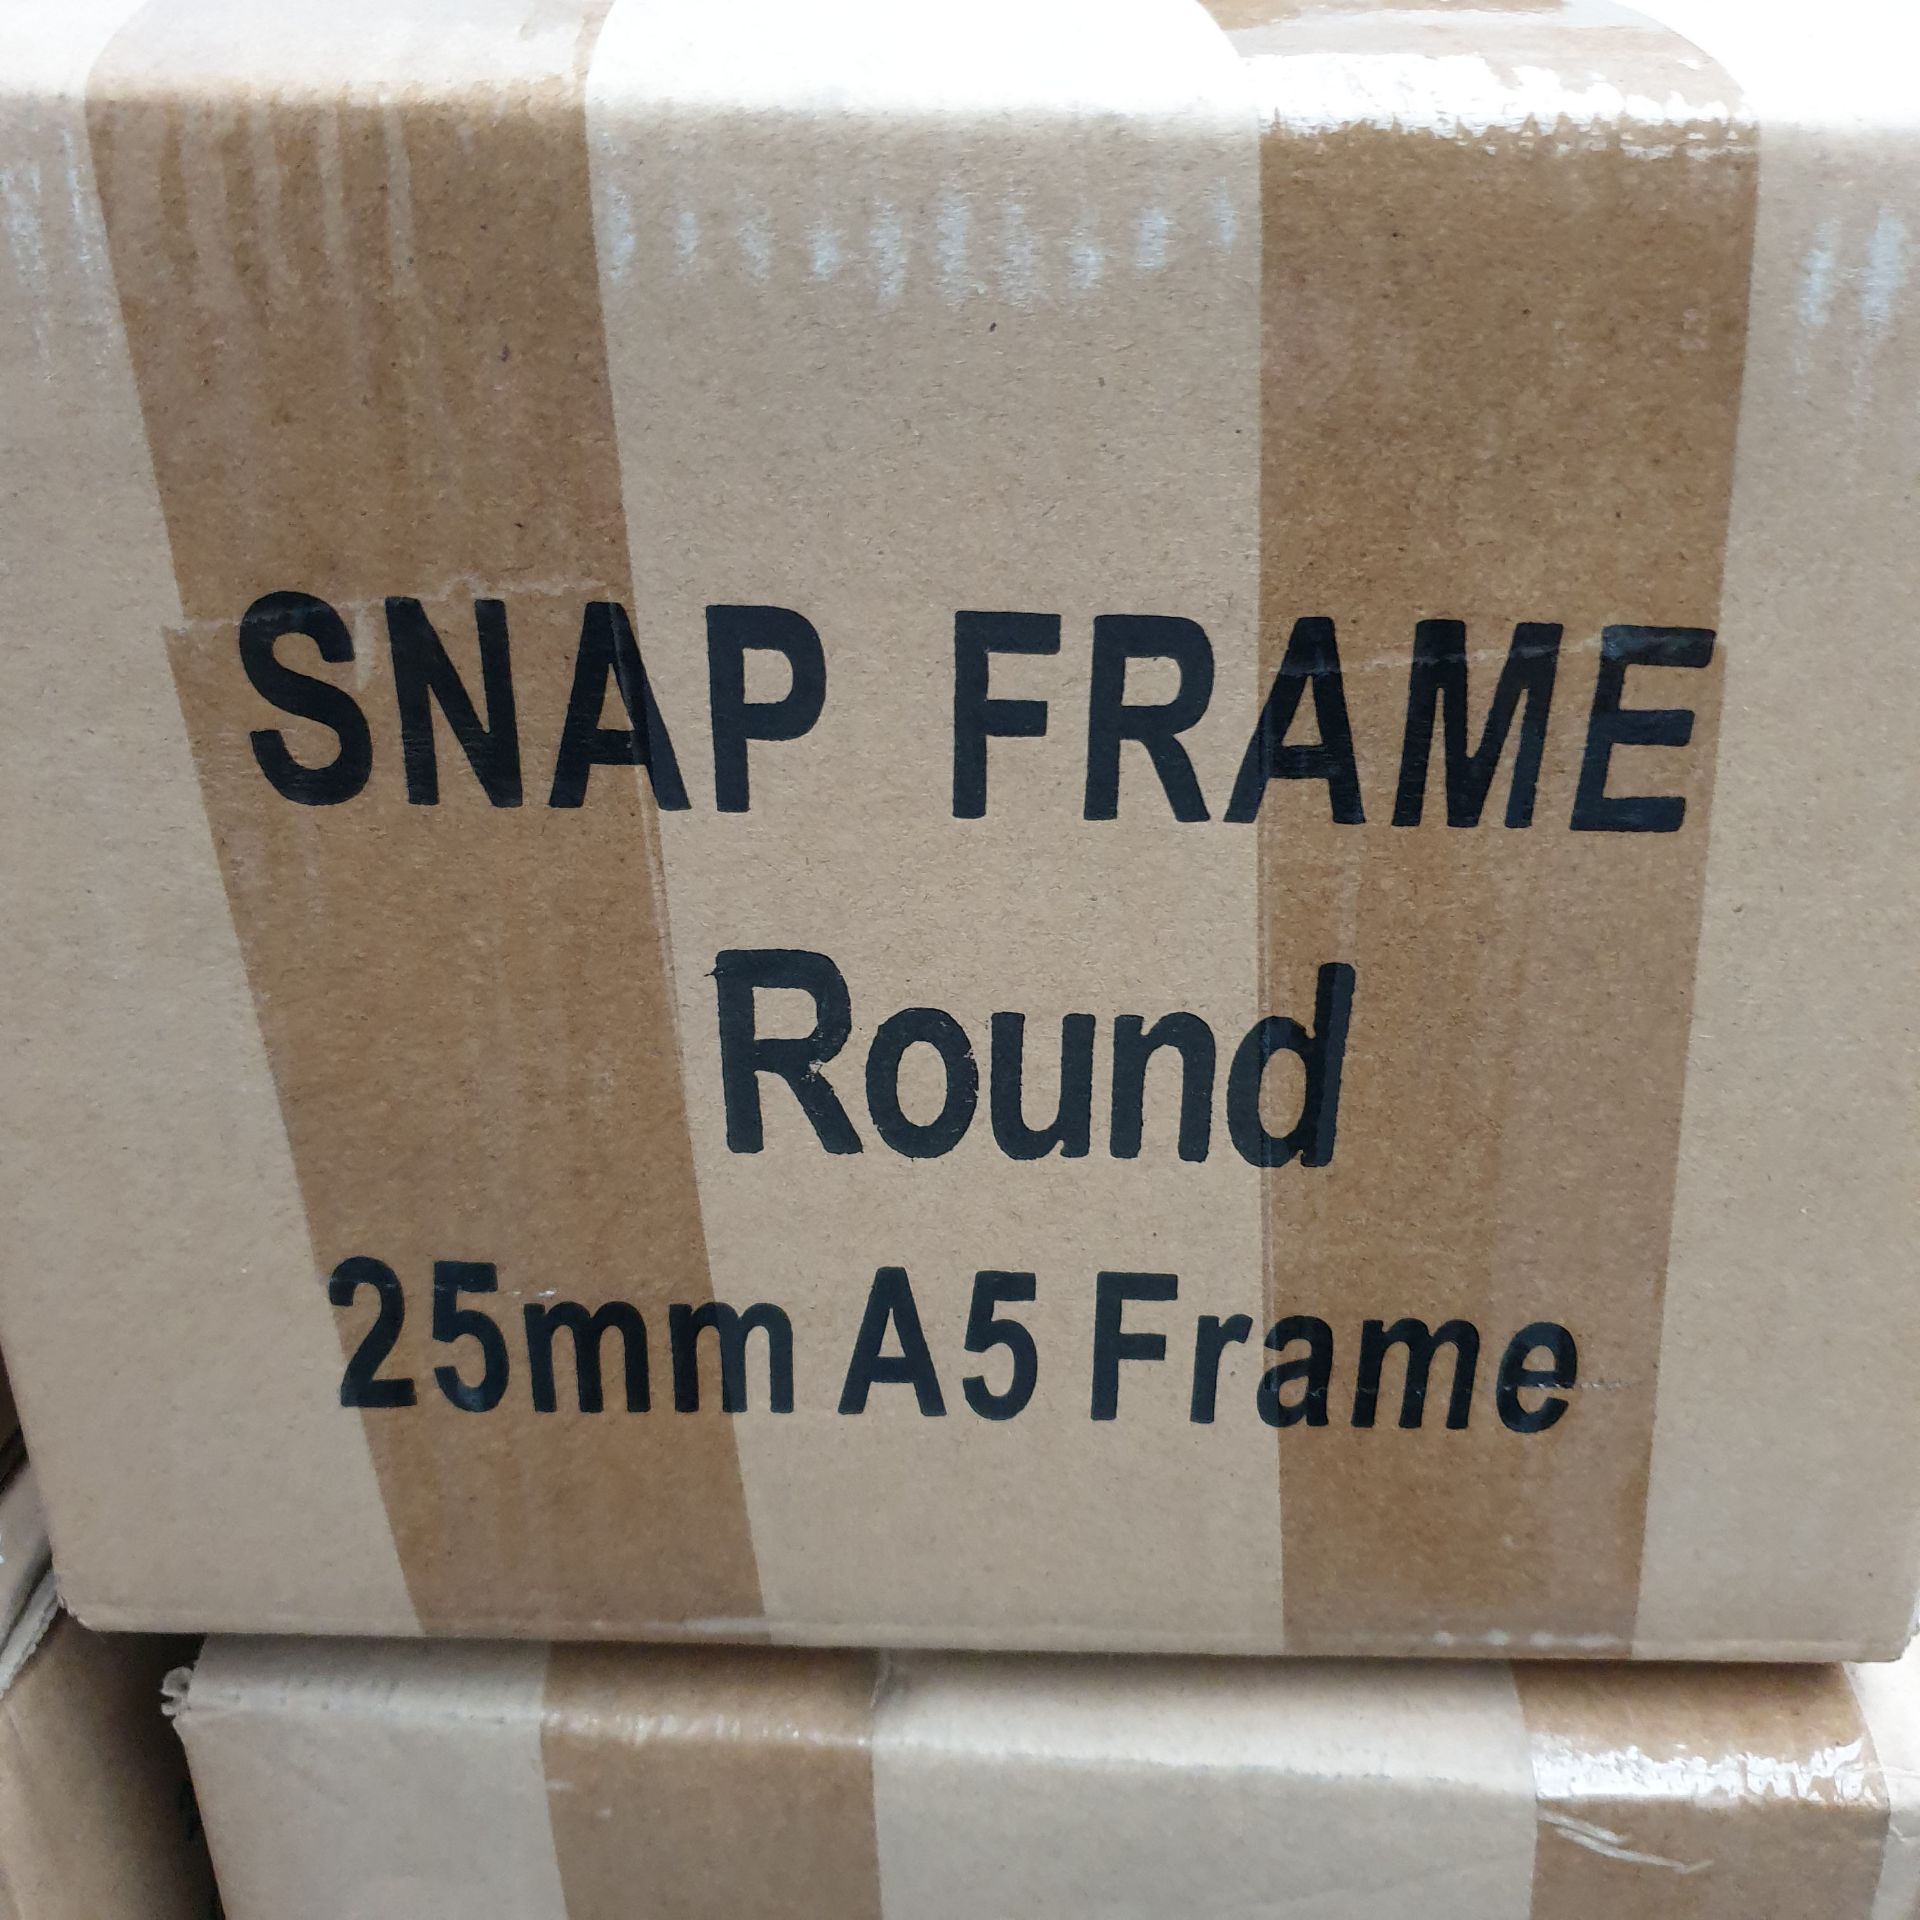 220 x Snap Frame Round 25mm A5 Frame - Image 4 of 5